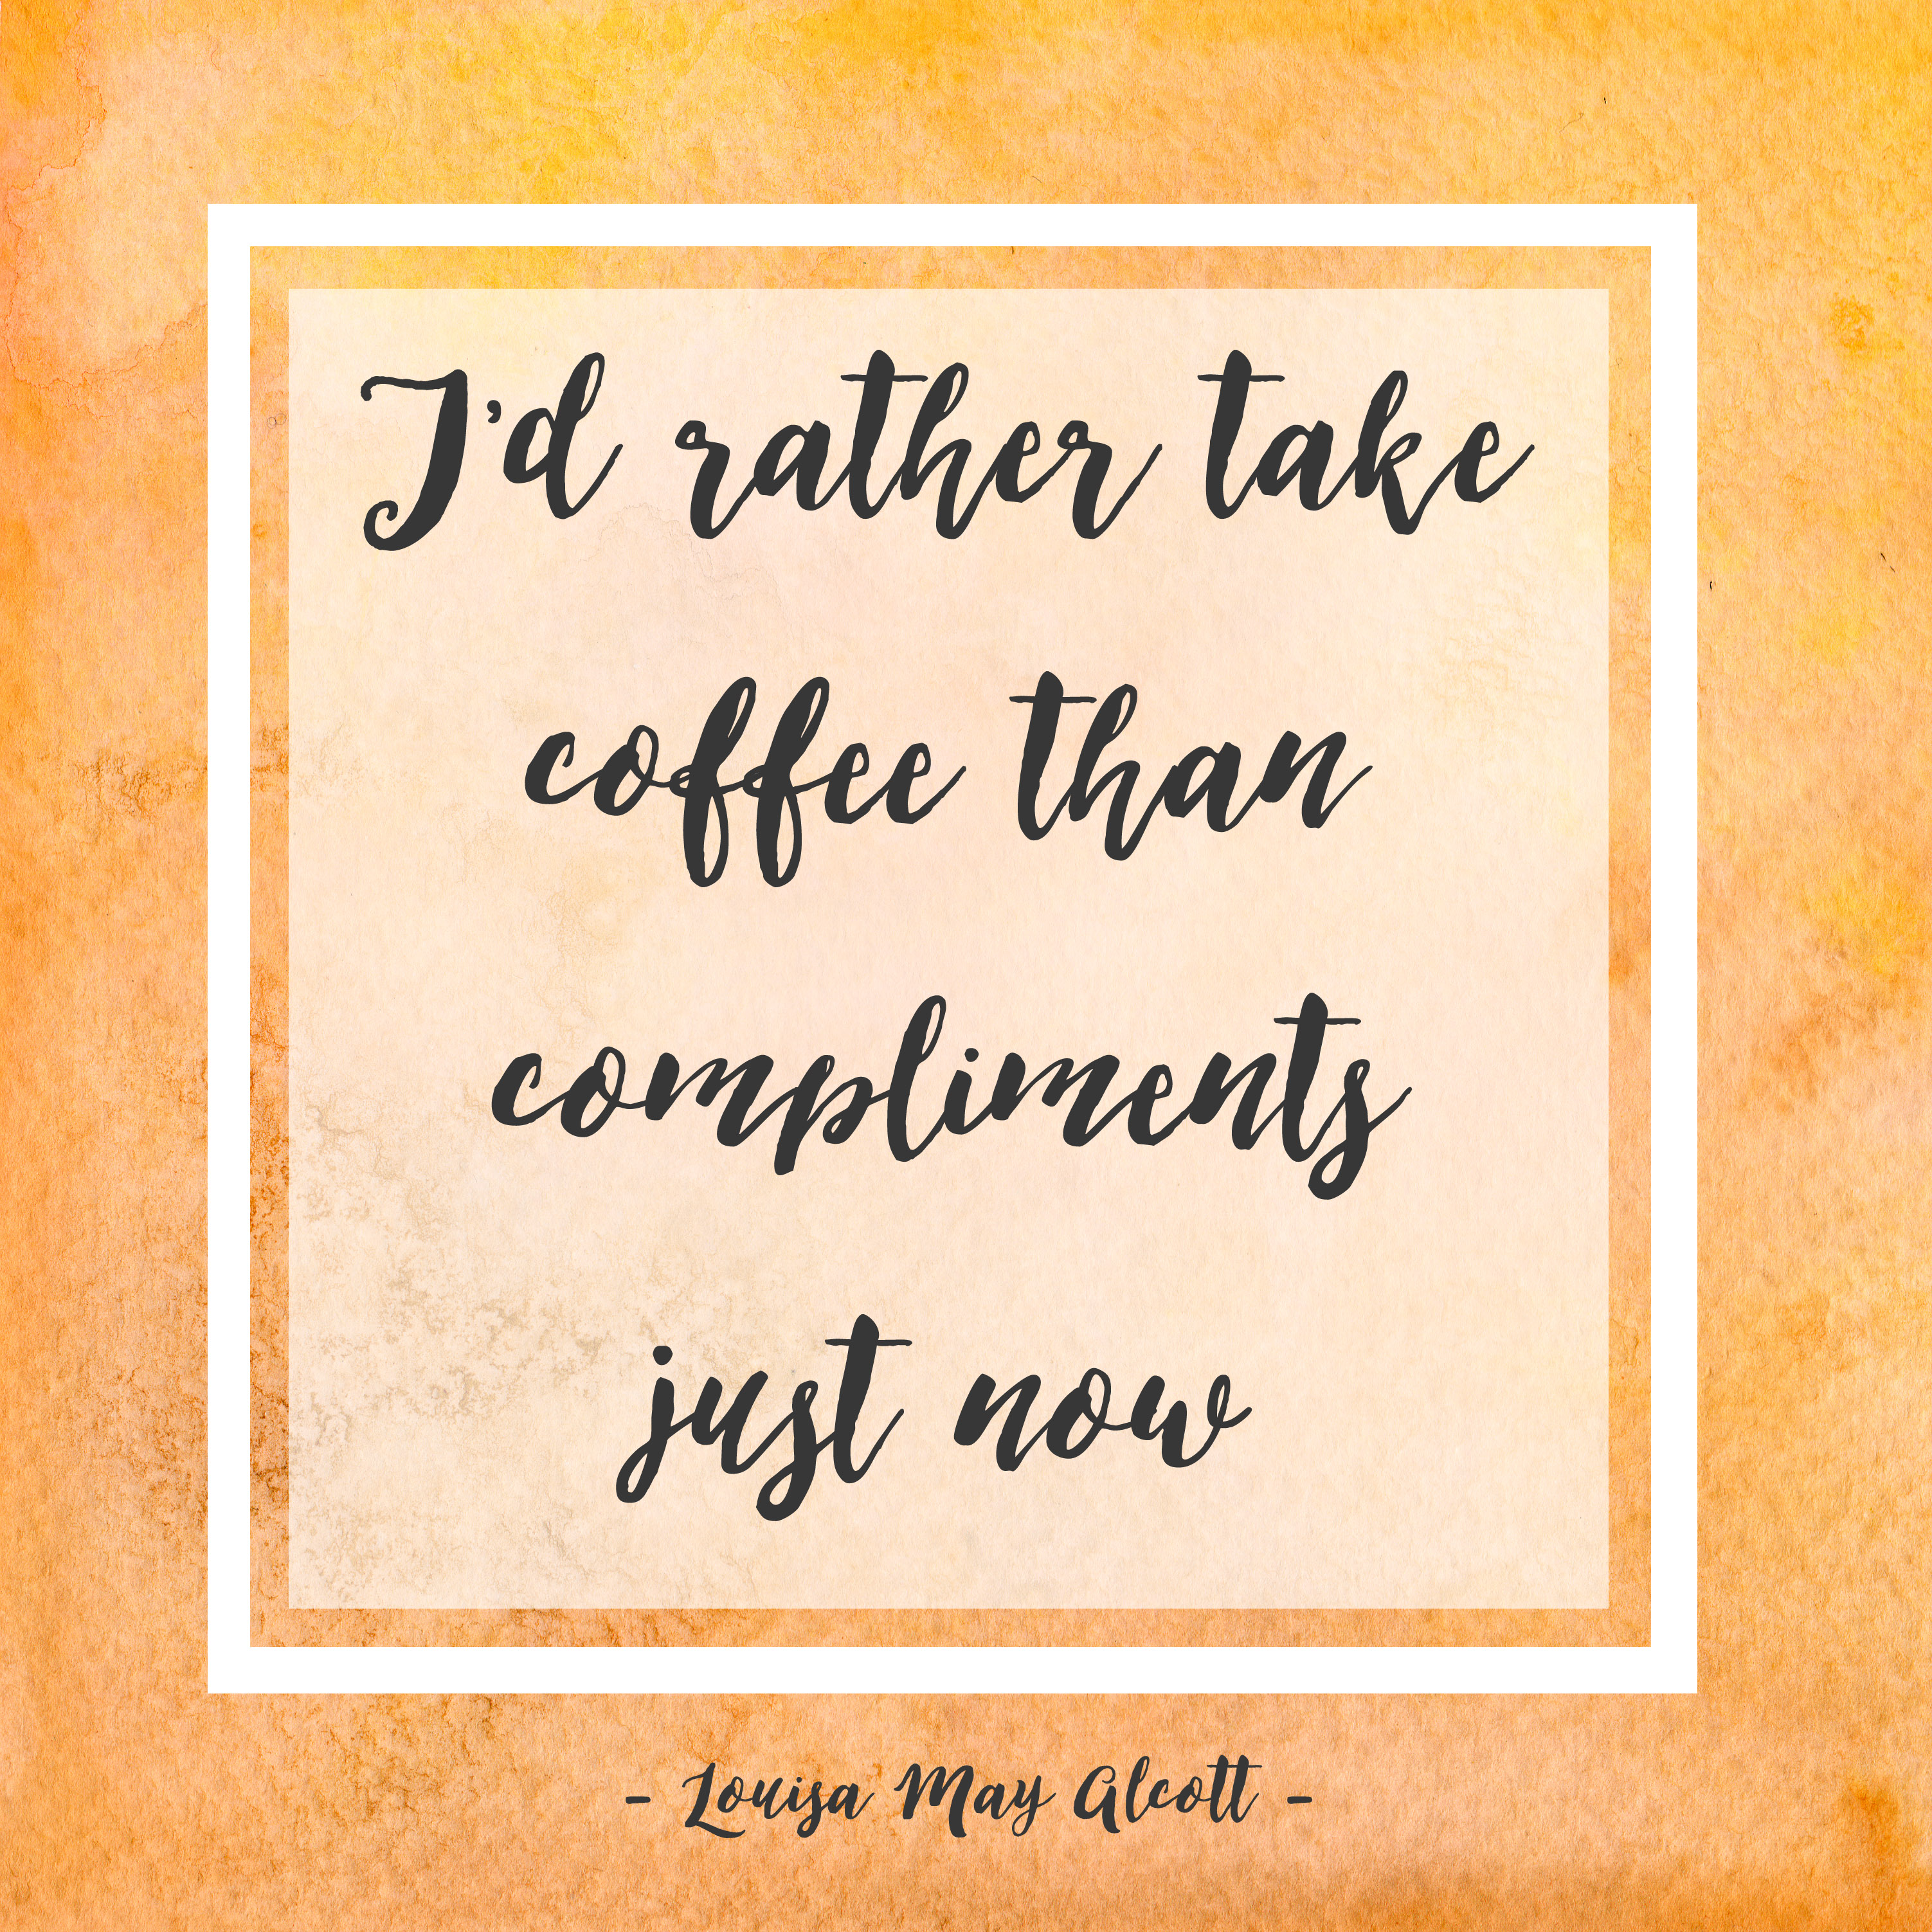 I'd rather take coffee than compliments just now louisa may alcott quote little women 